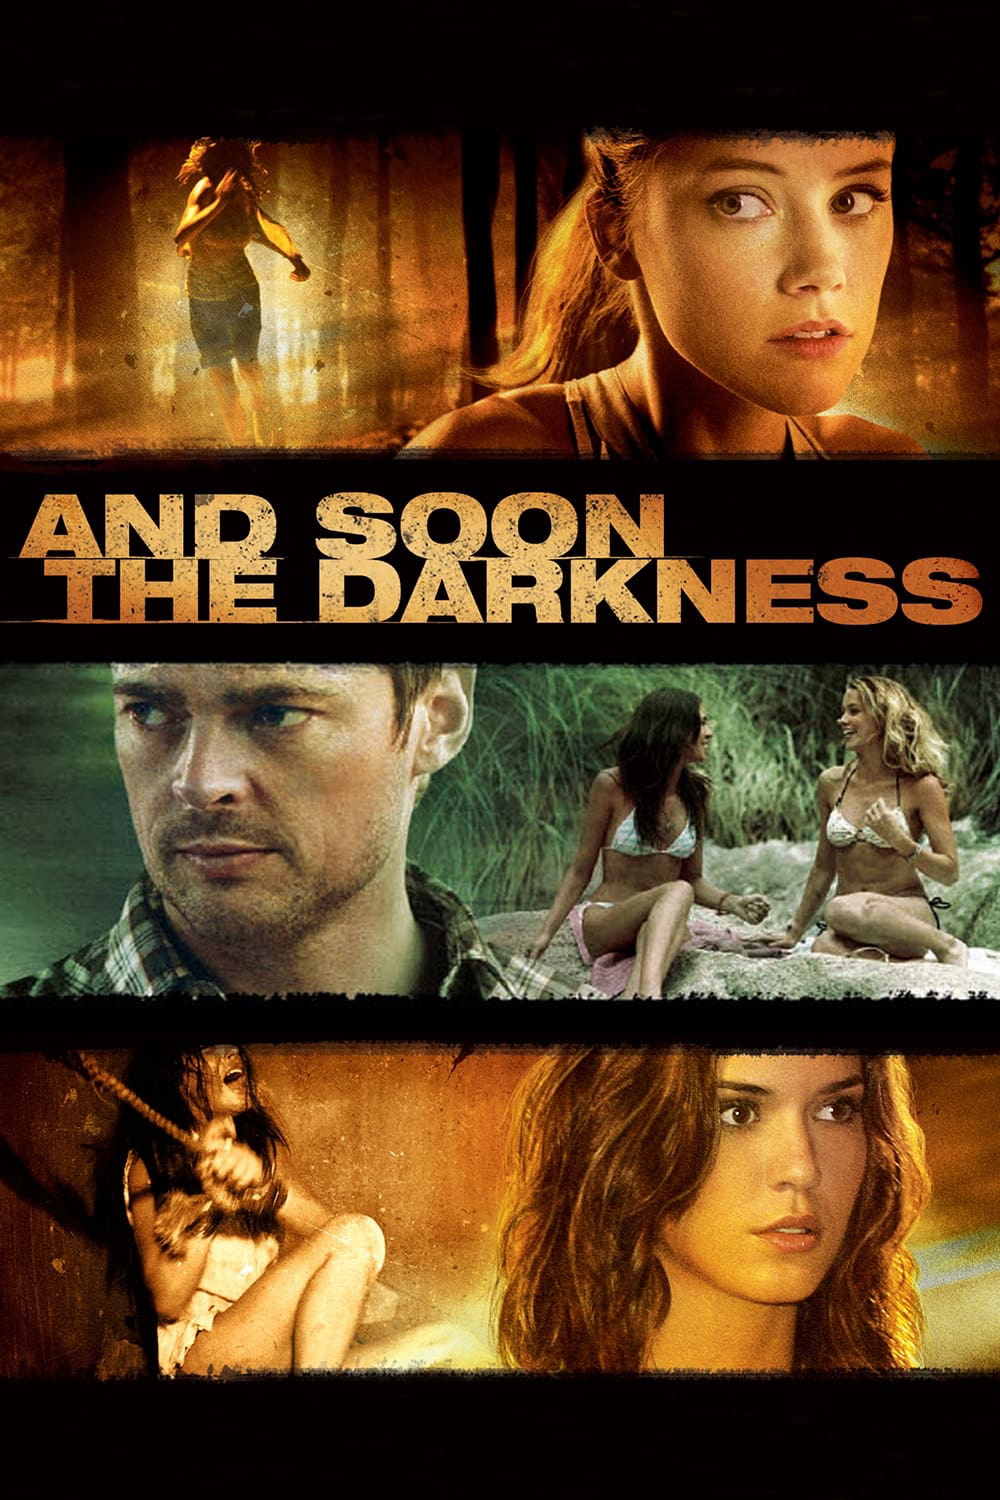 Poster Phim Trong Bóng Tối (And Soon the Darkness)